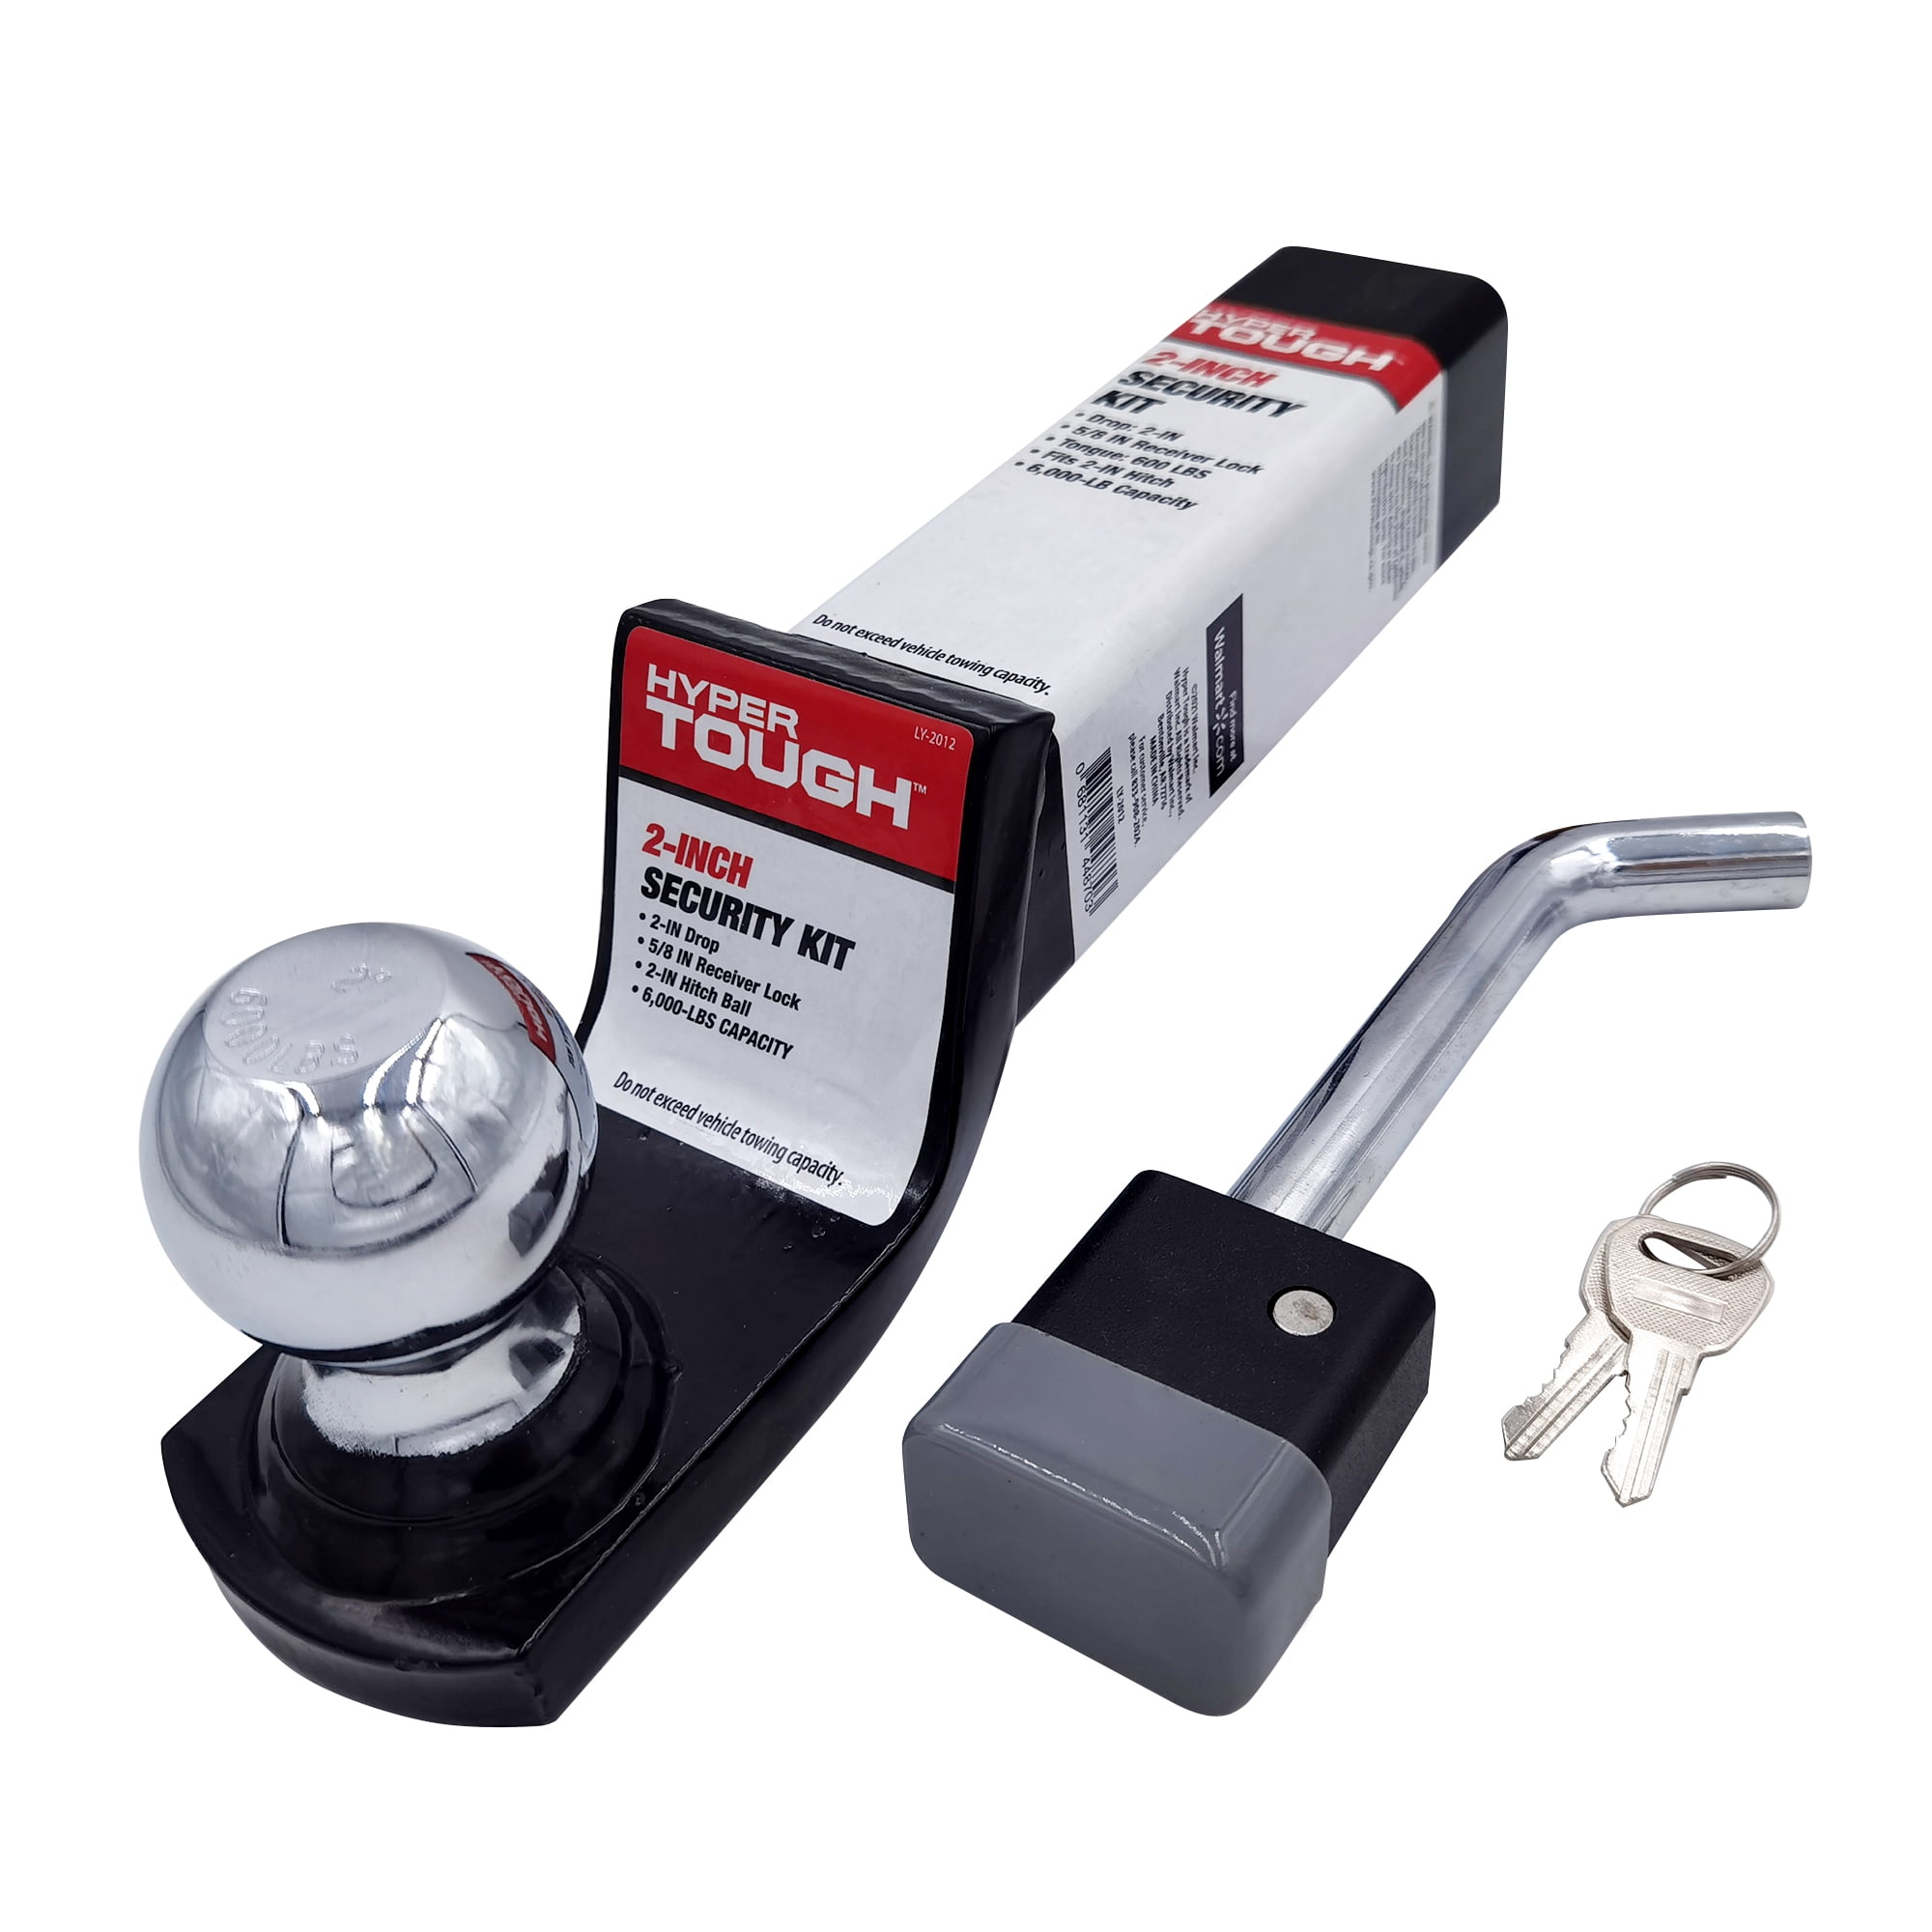 HyperTough Ball Mount Security Kit, 2 inch Drop and 2 inch Hitch Ball